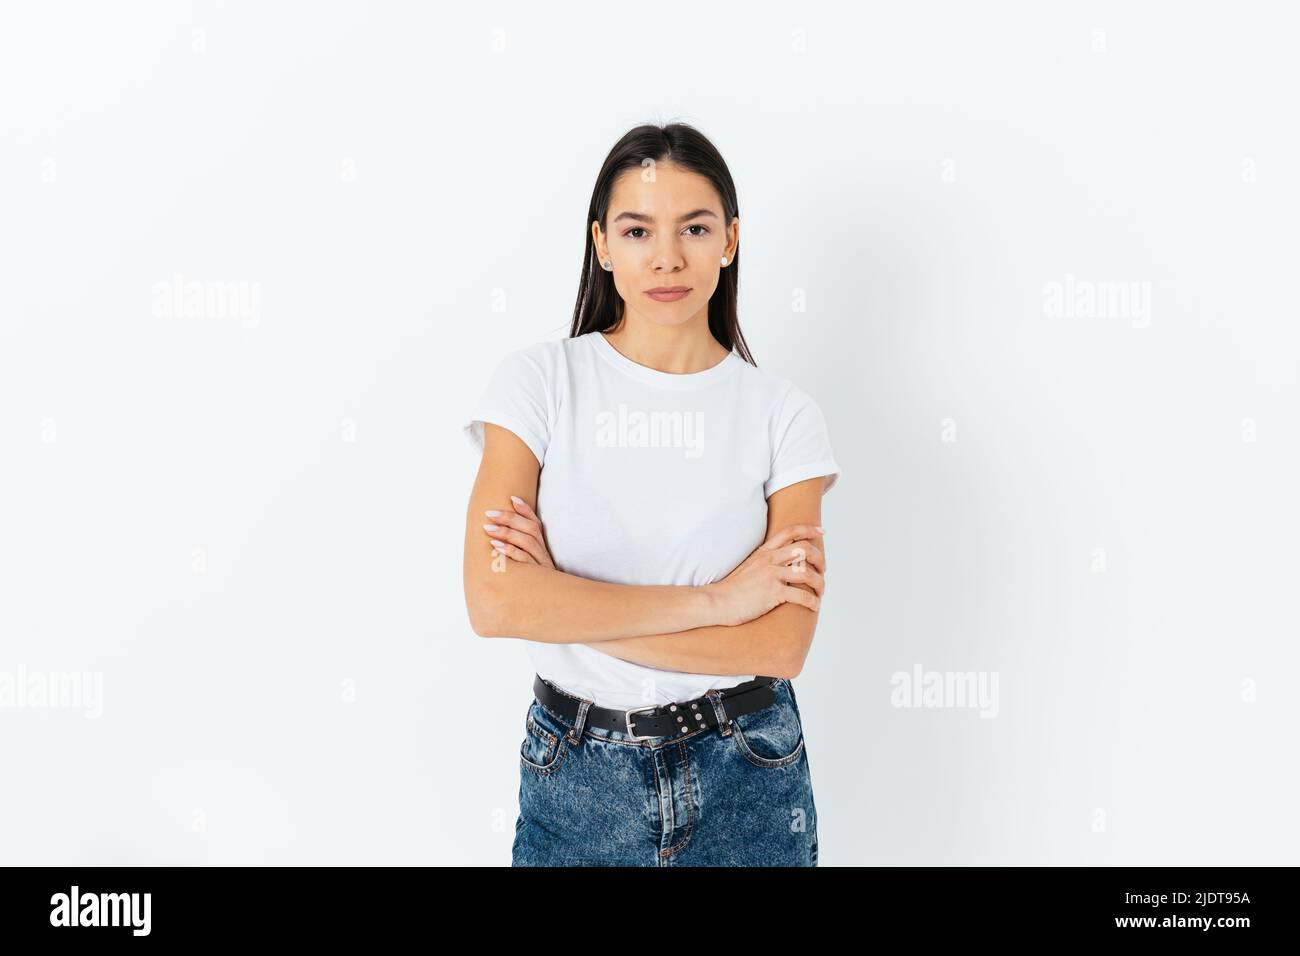 Portrait of calm confident young beautiful brunette woman wearing white t-shirt and blue jeans looking at camera on white studio background Stock Photo